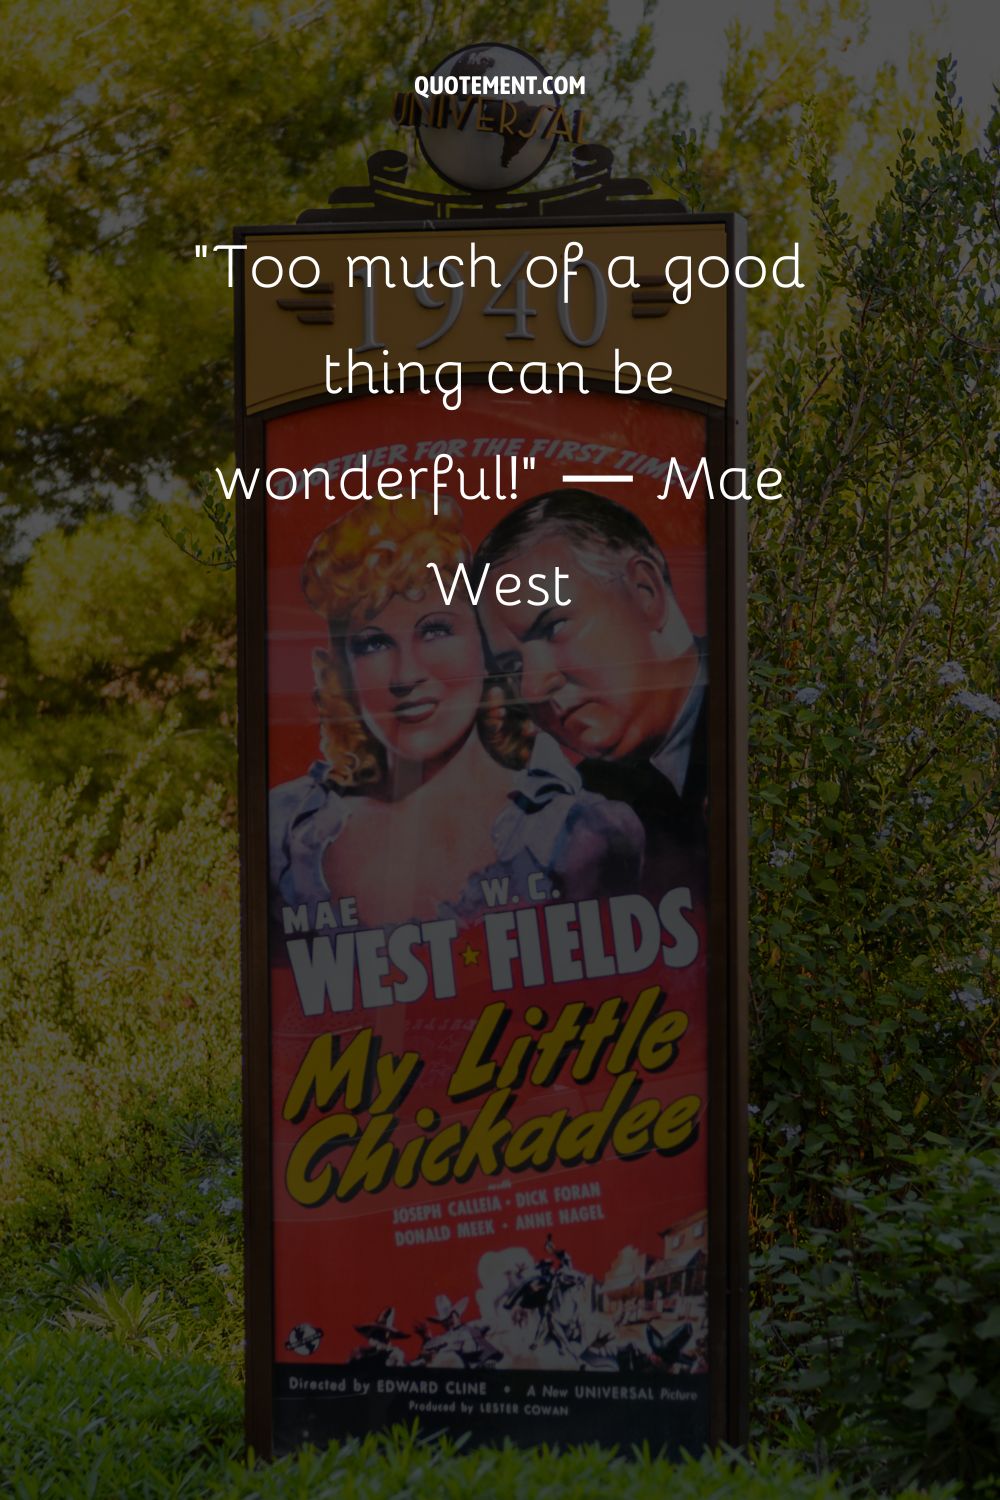 Poster of Mae West representing the best Mae West quote.
